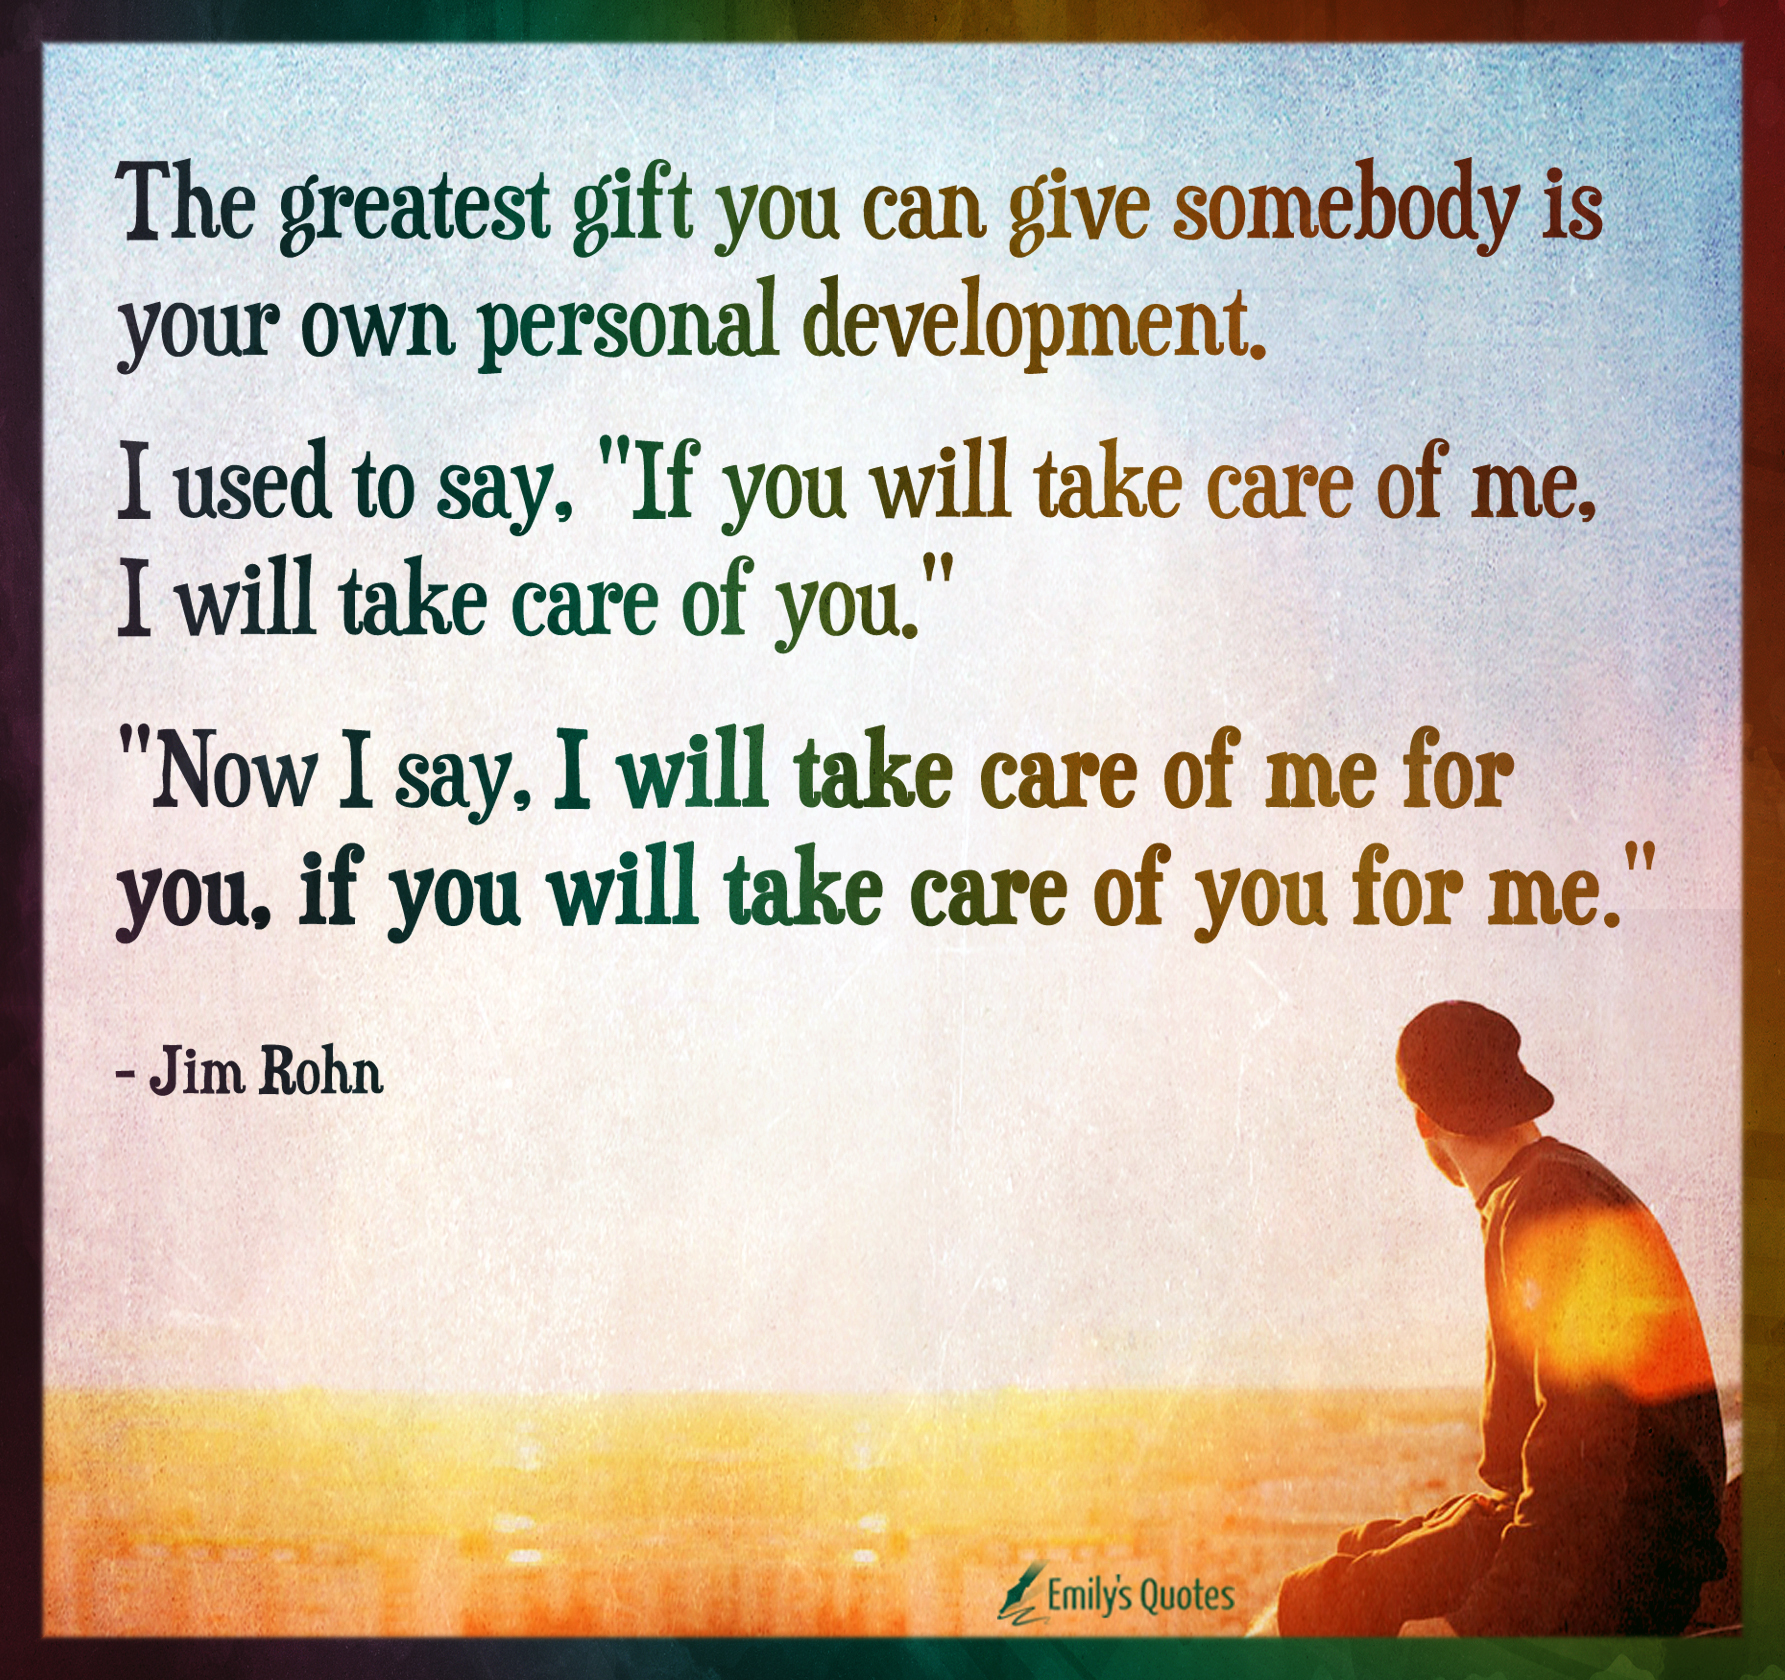 The greatest gift you can give somebody is your own personal development